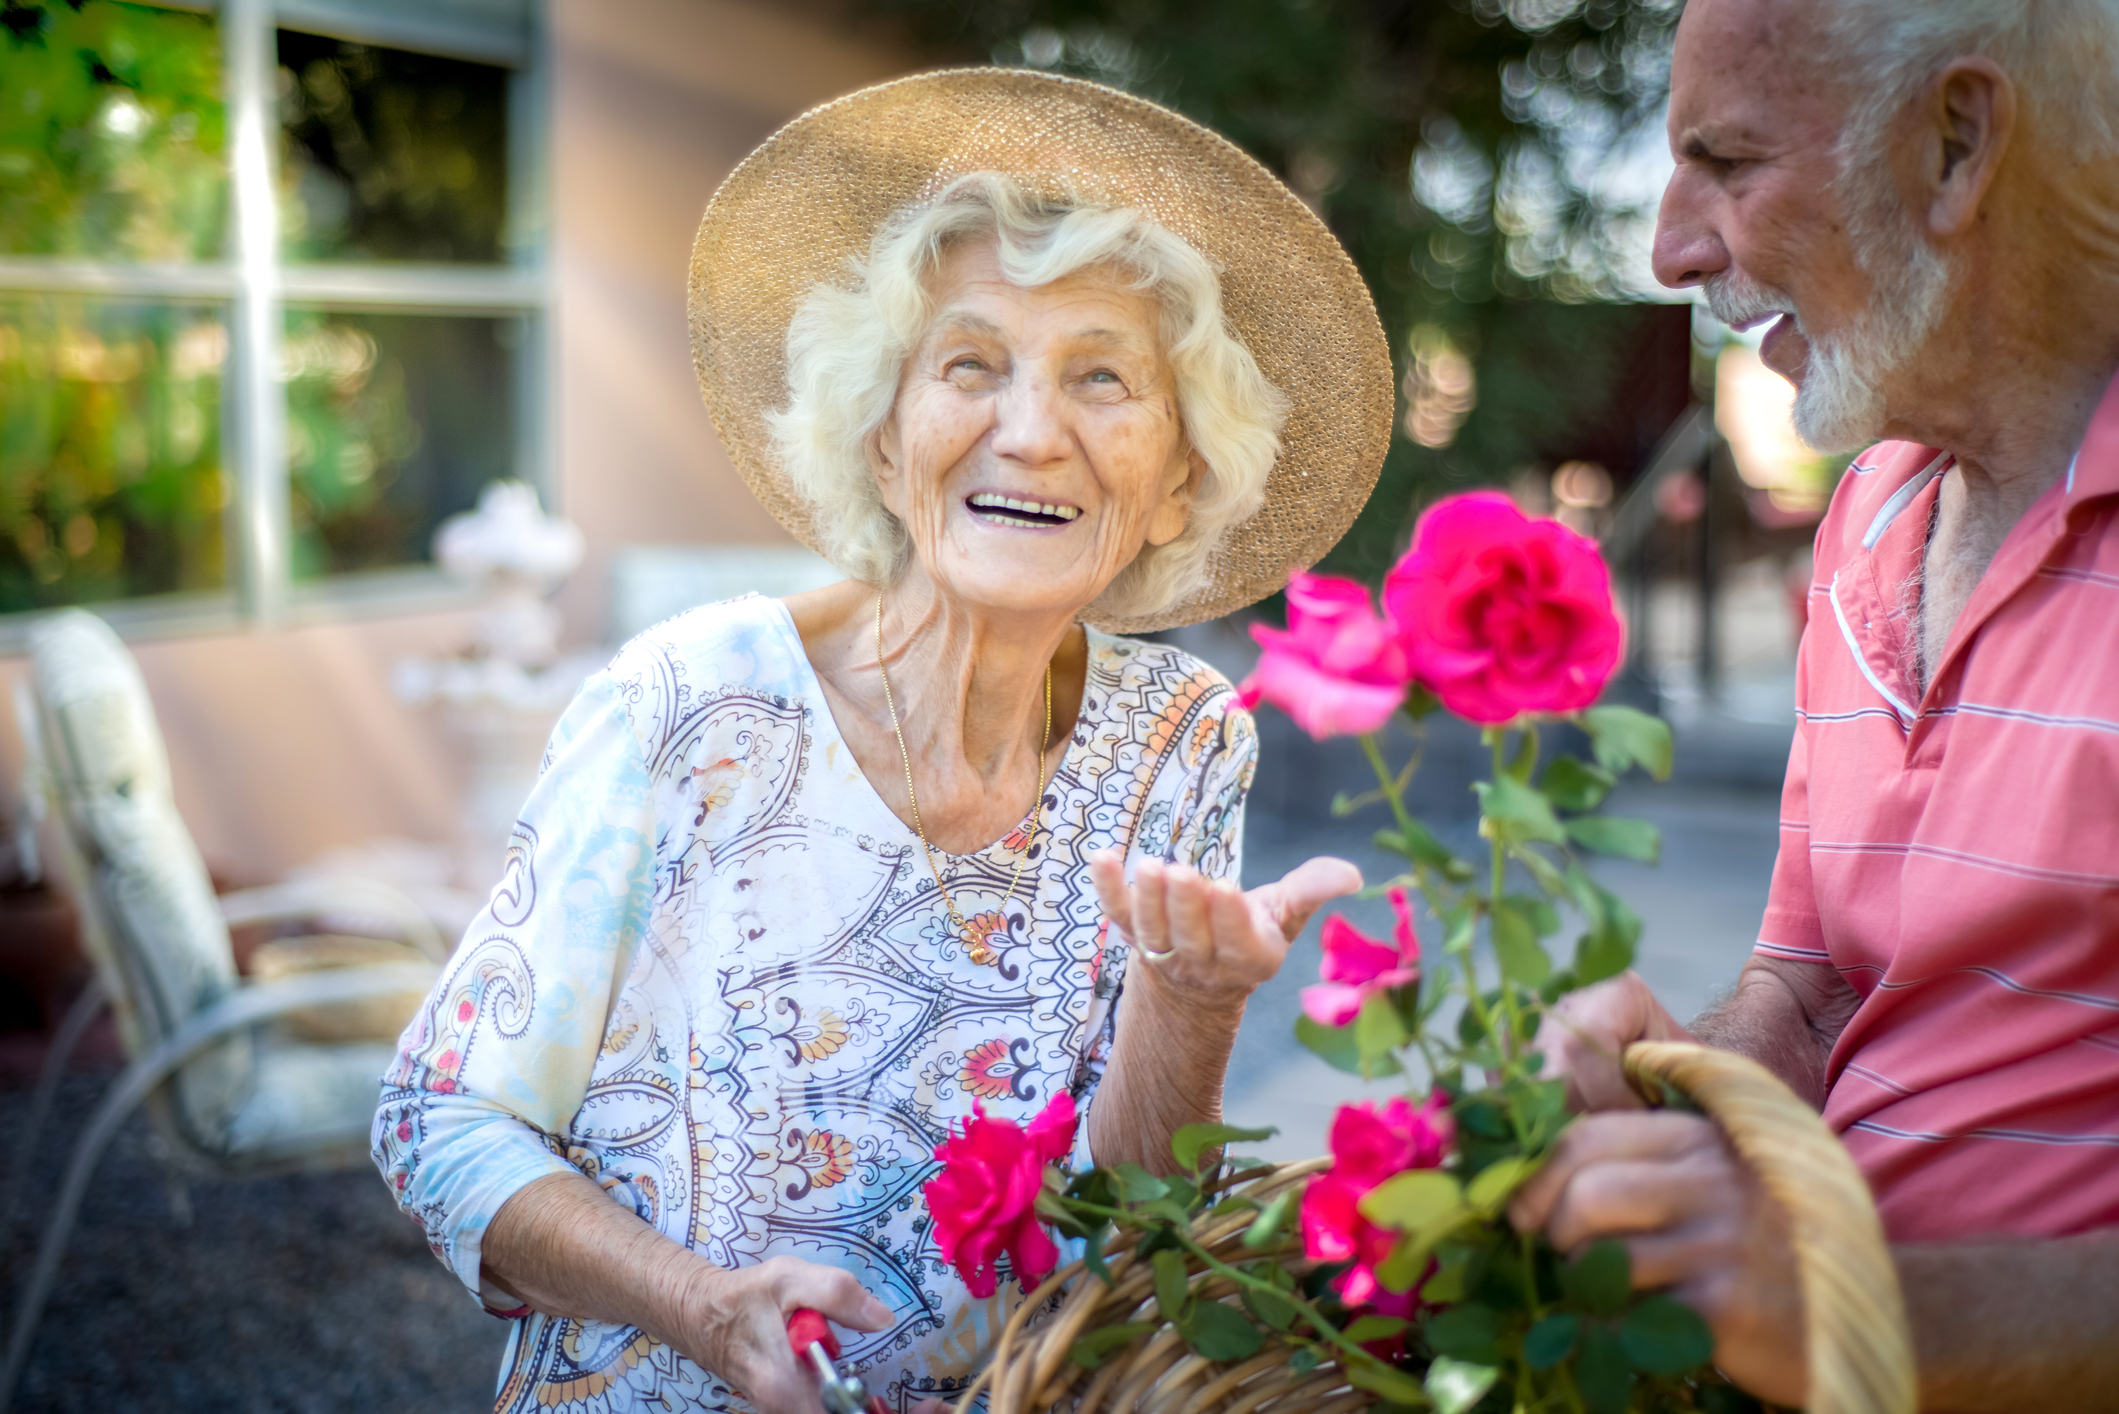 Elderly woman with a straw hat and paisley top happily tending to a rose garden with an elderly man in a casual shirt